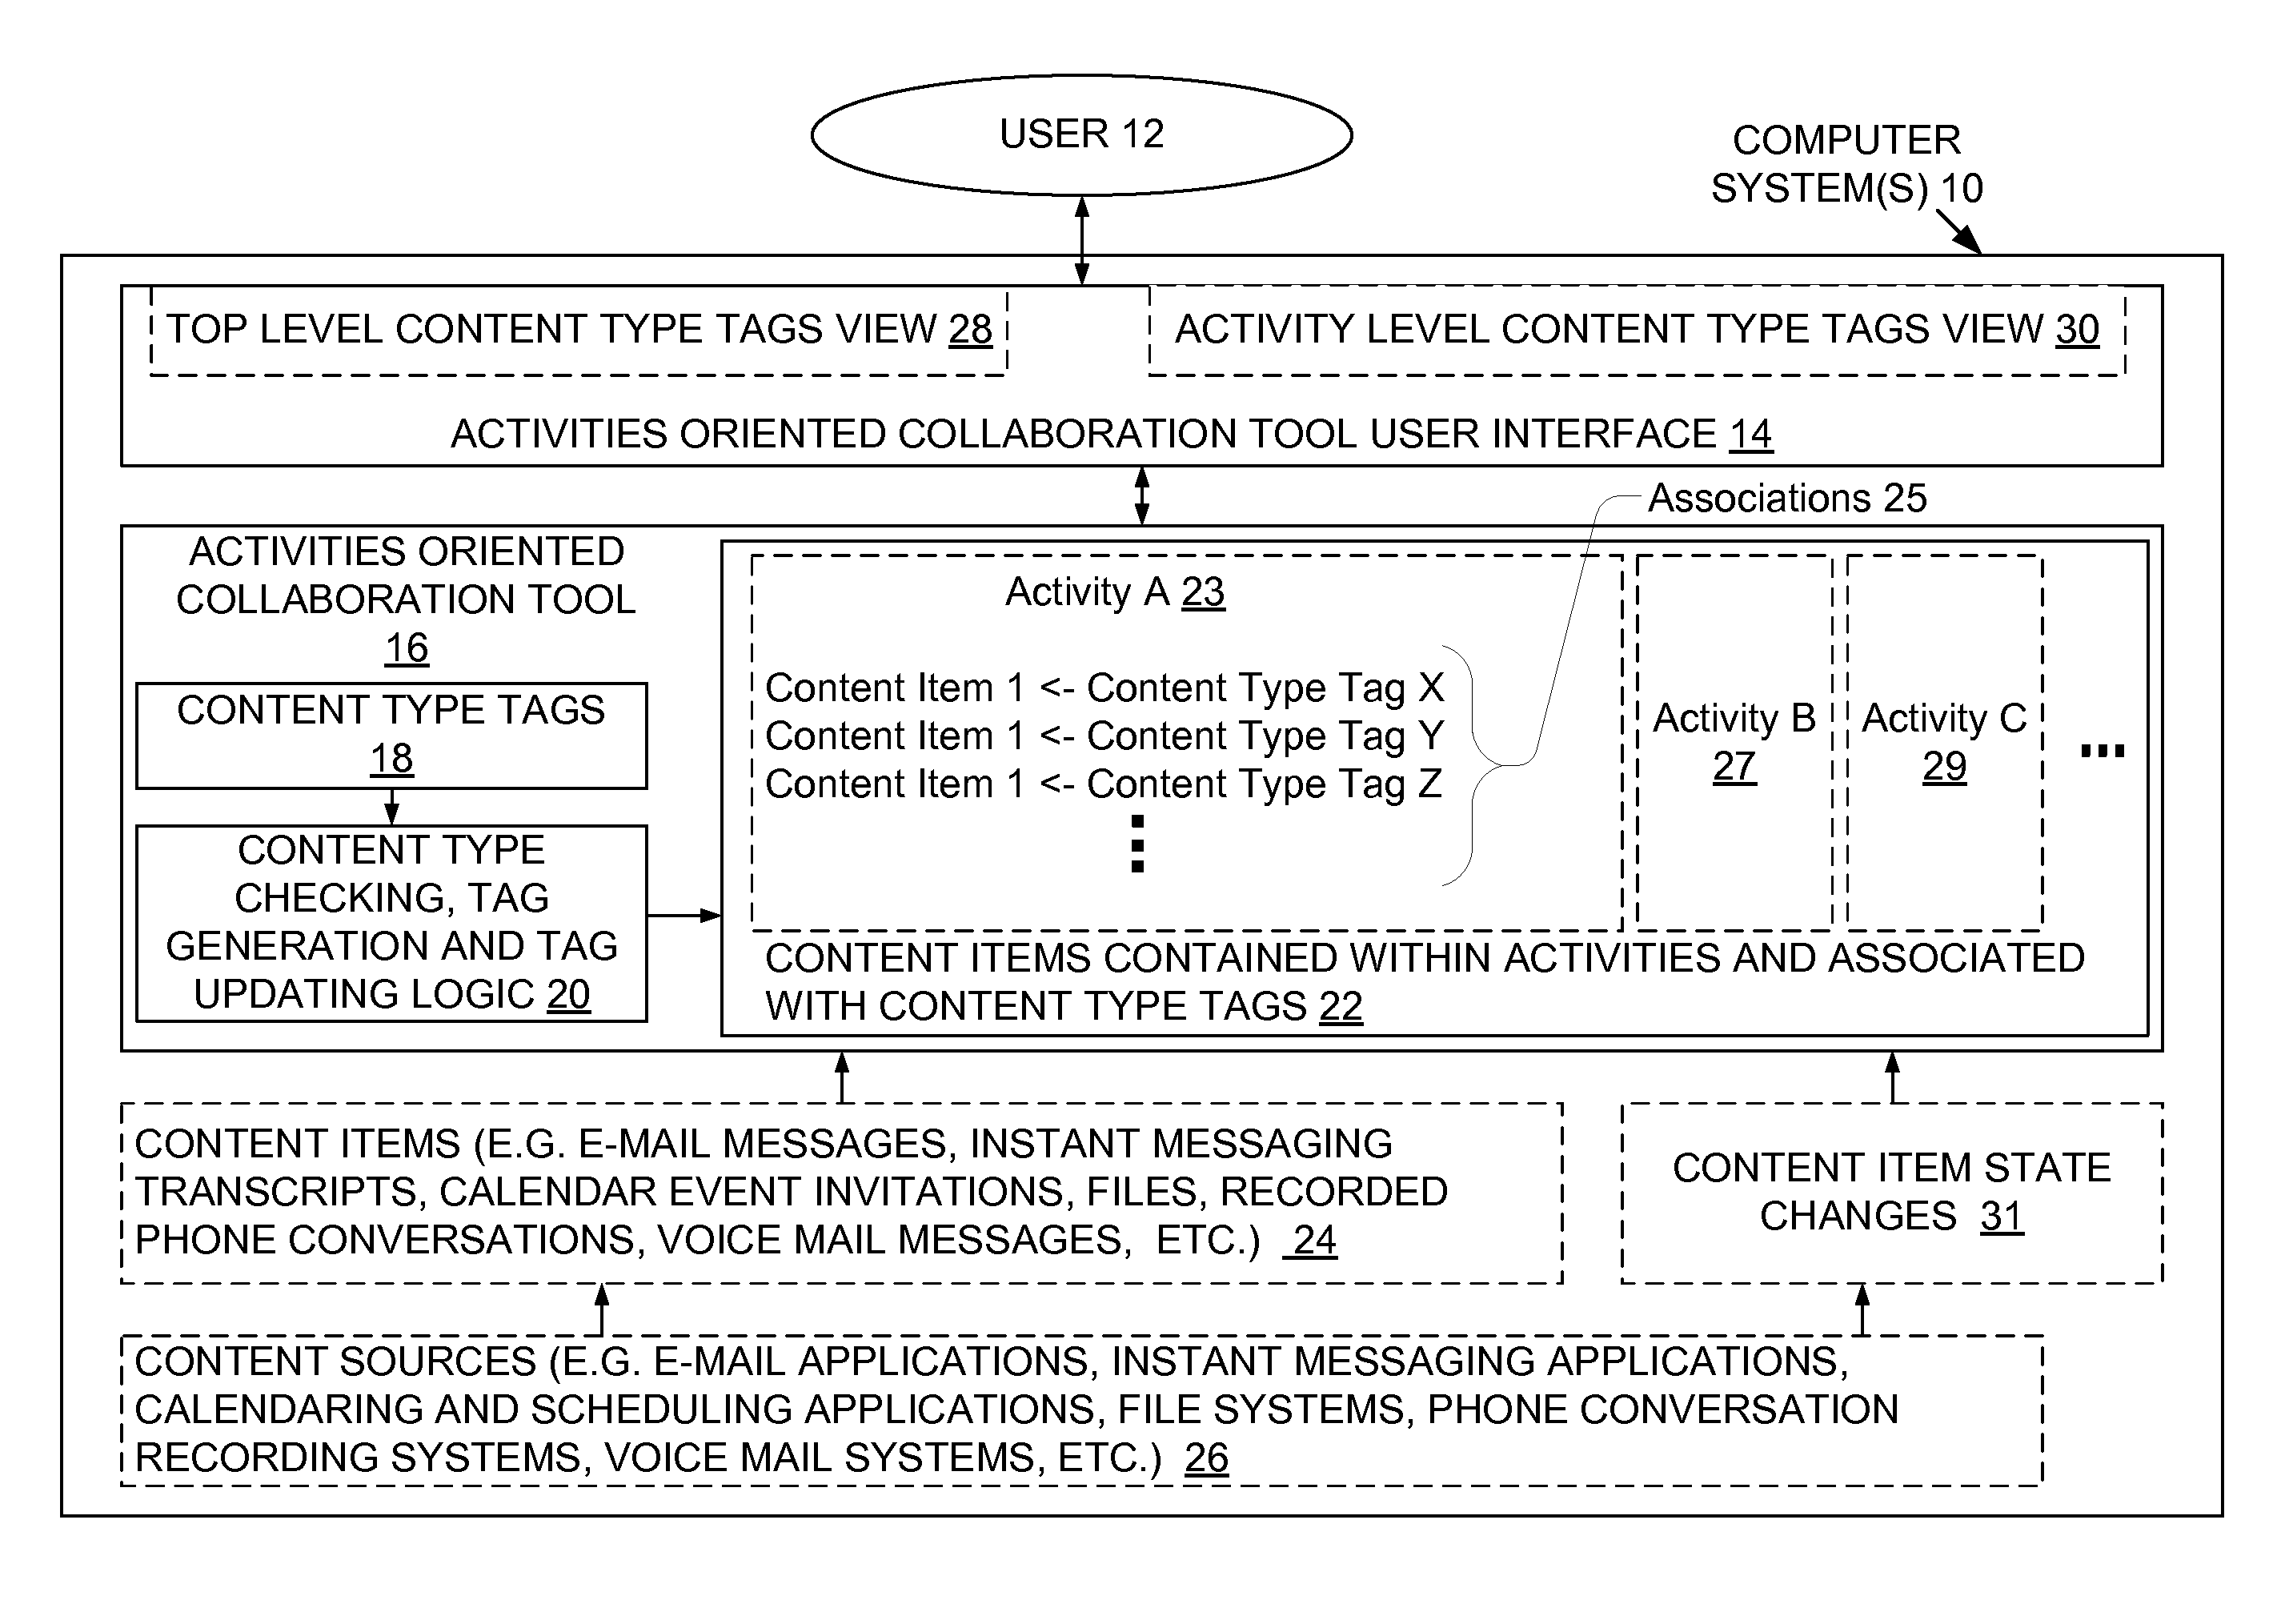 Method and system for automatic generation and updating of tags based on type of communication and content state in an activities oriented collaboration tool